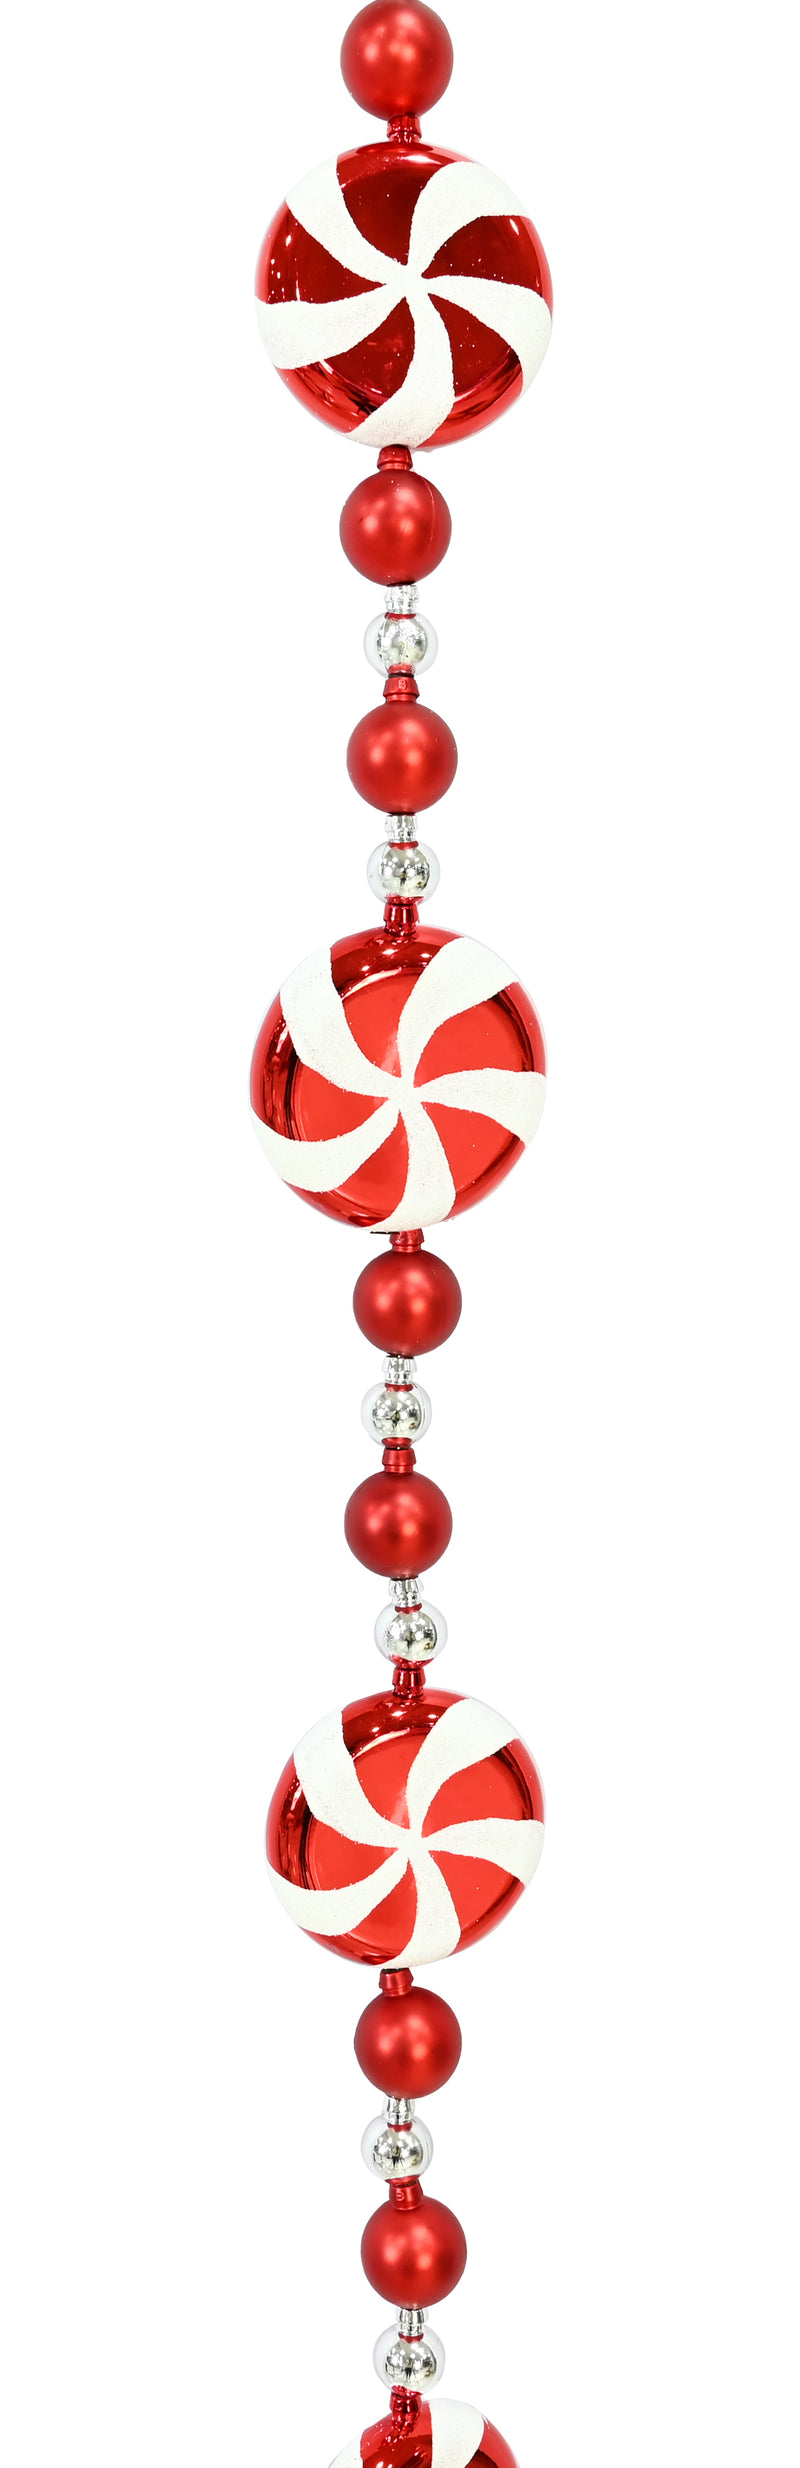 COMING SOON - CANDY CANE LOLLIPOP BAUBLE GARLAND